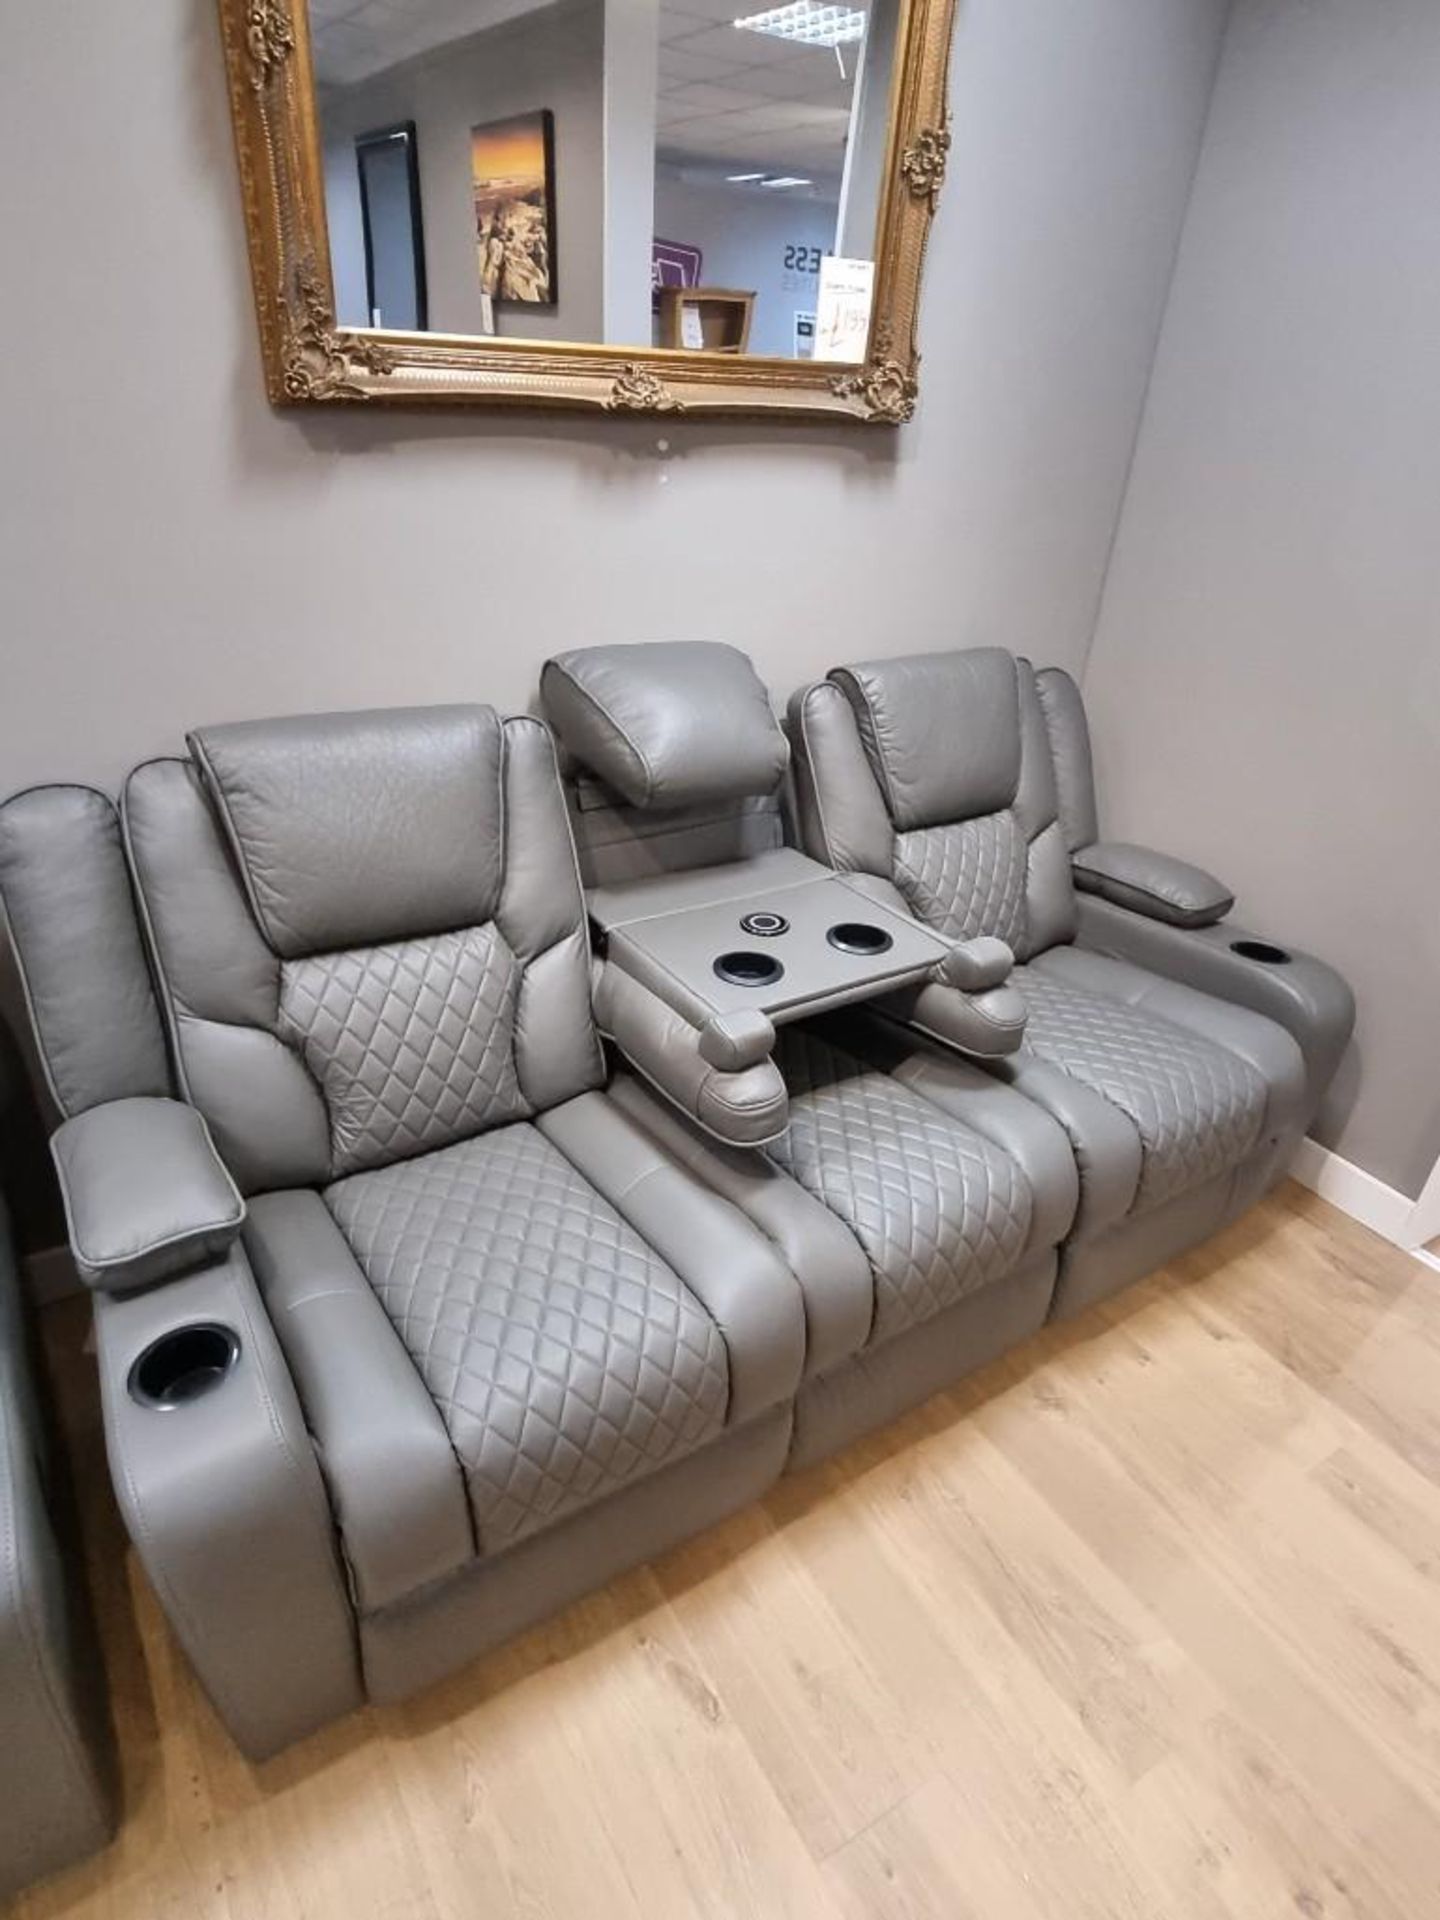 BRAND NEW Bentley Grey Leather 3 Seater Electric Recliner With Wireless Charging and Floor lights! - Image 7 of 7